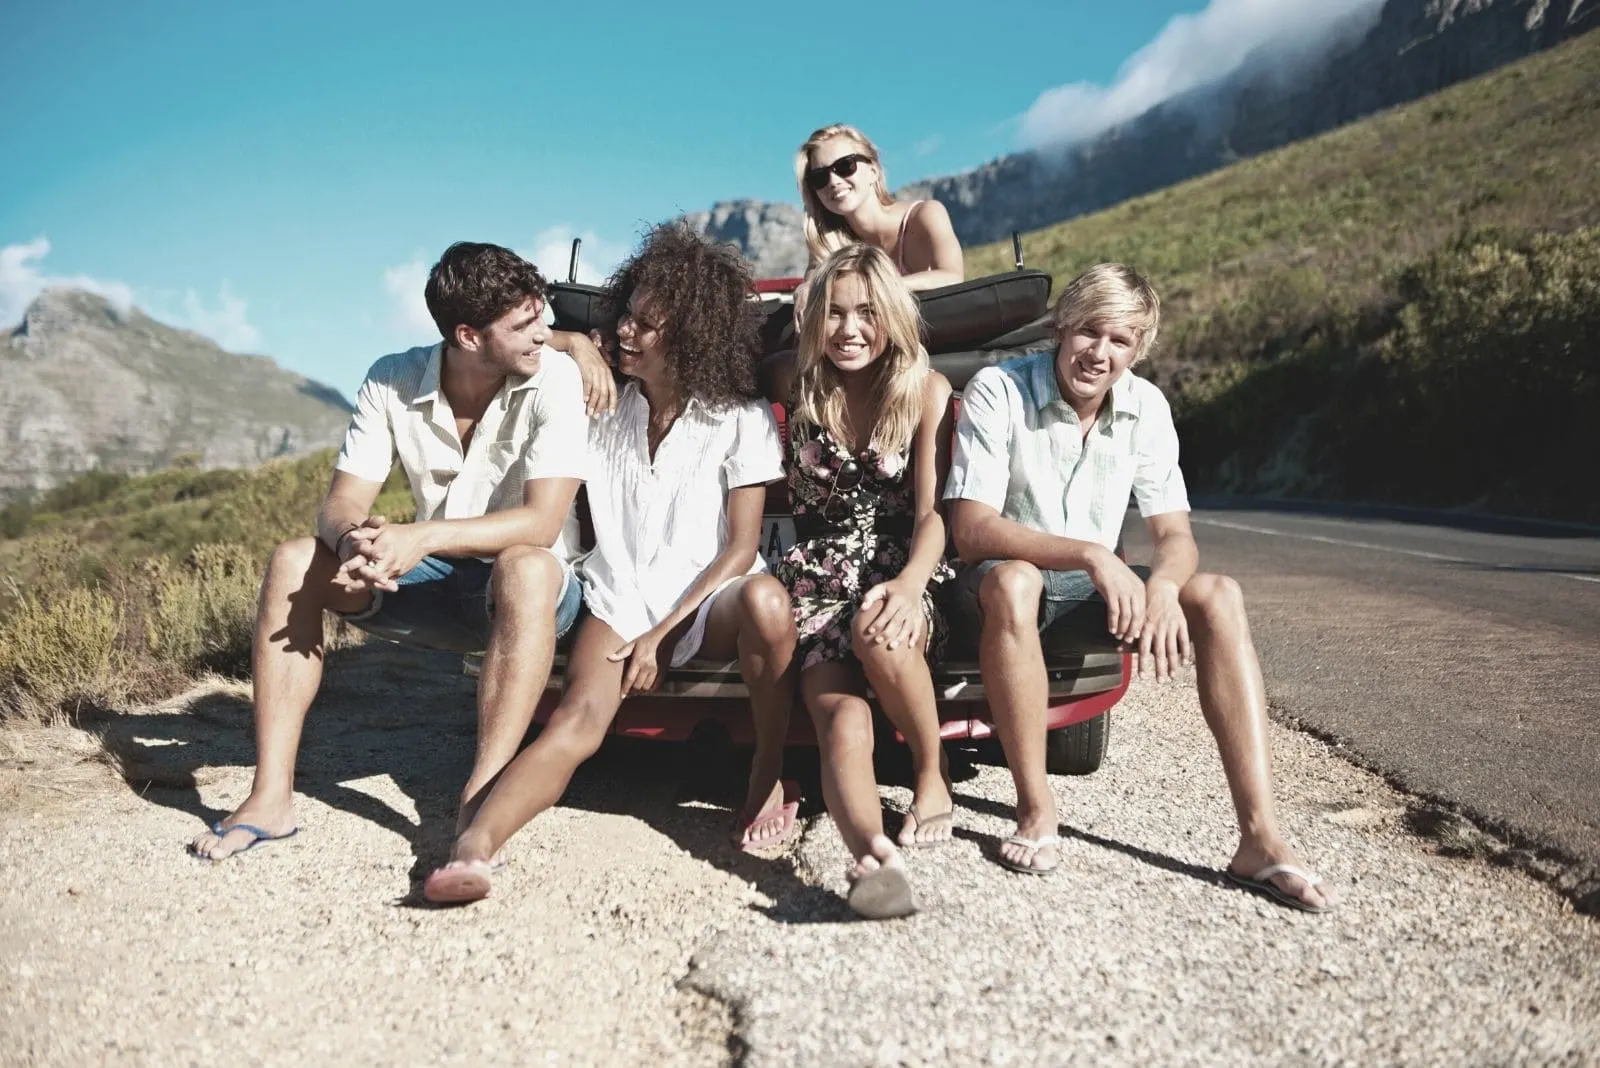 group of young friends sitting on the car bump while on a road trip